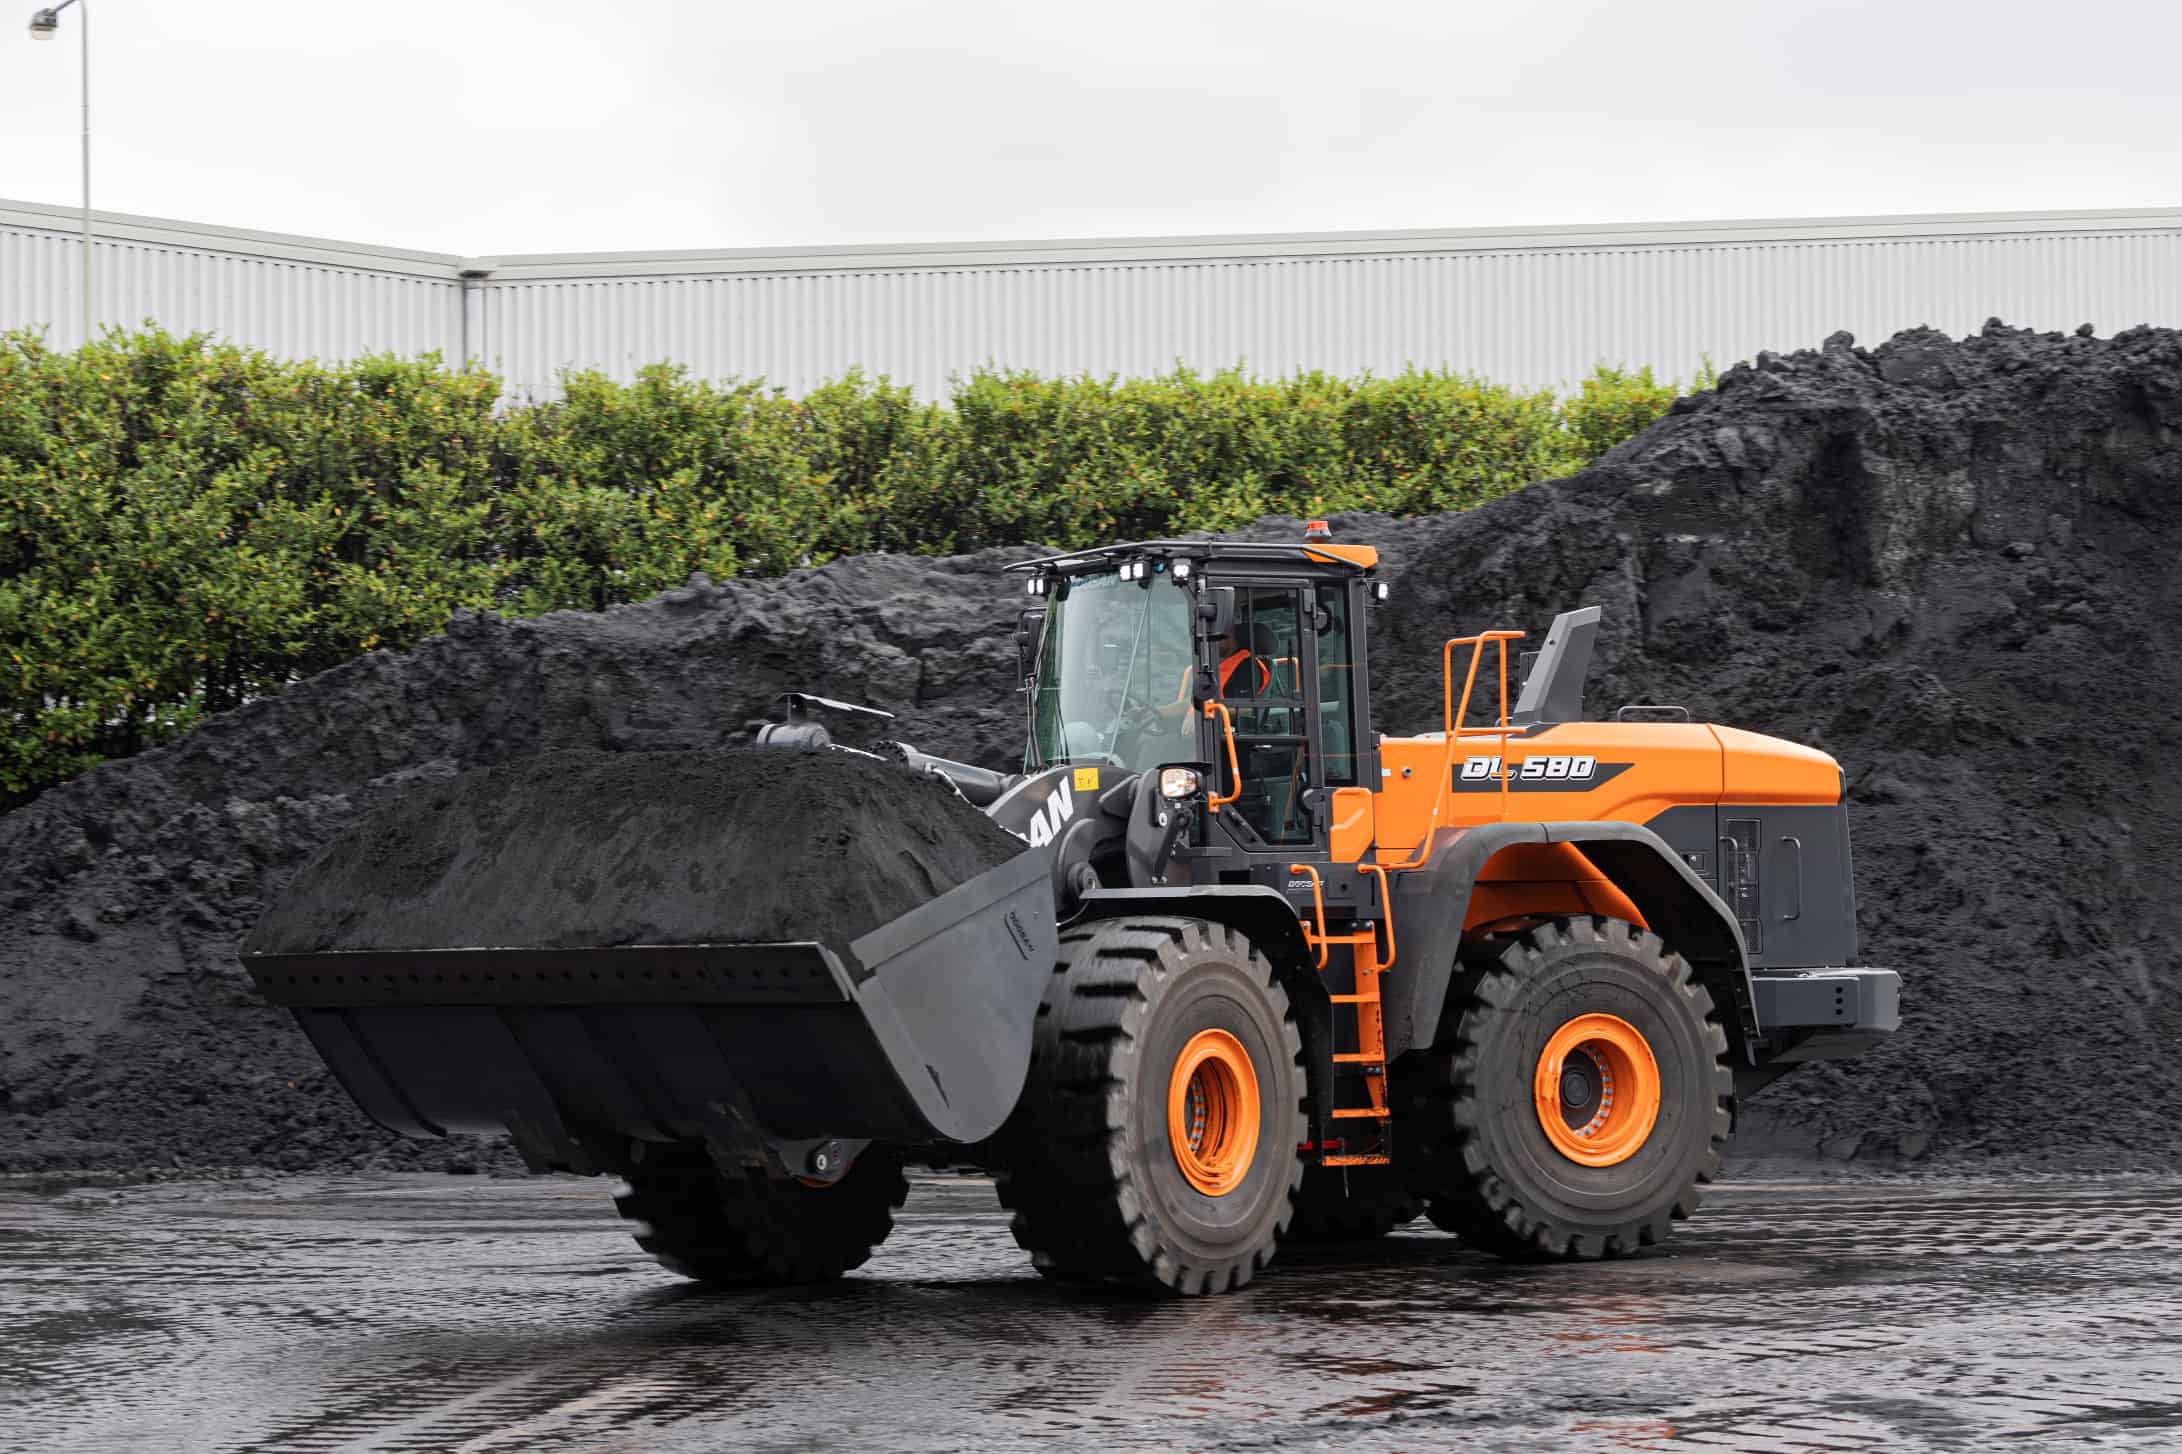 Doosan aims for top spot with new ‘DL-7’ Wheel Loader range